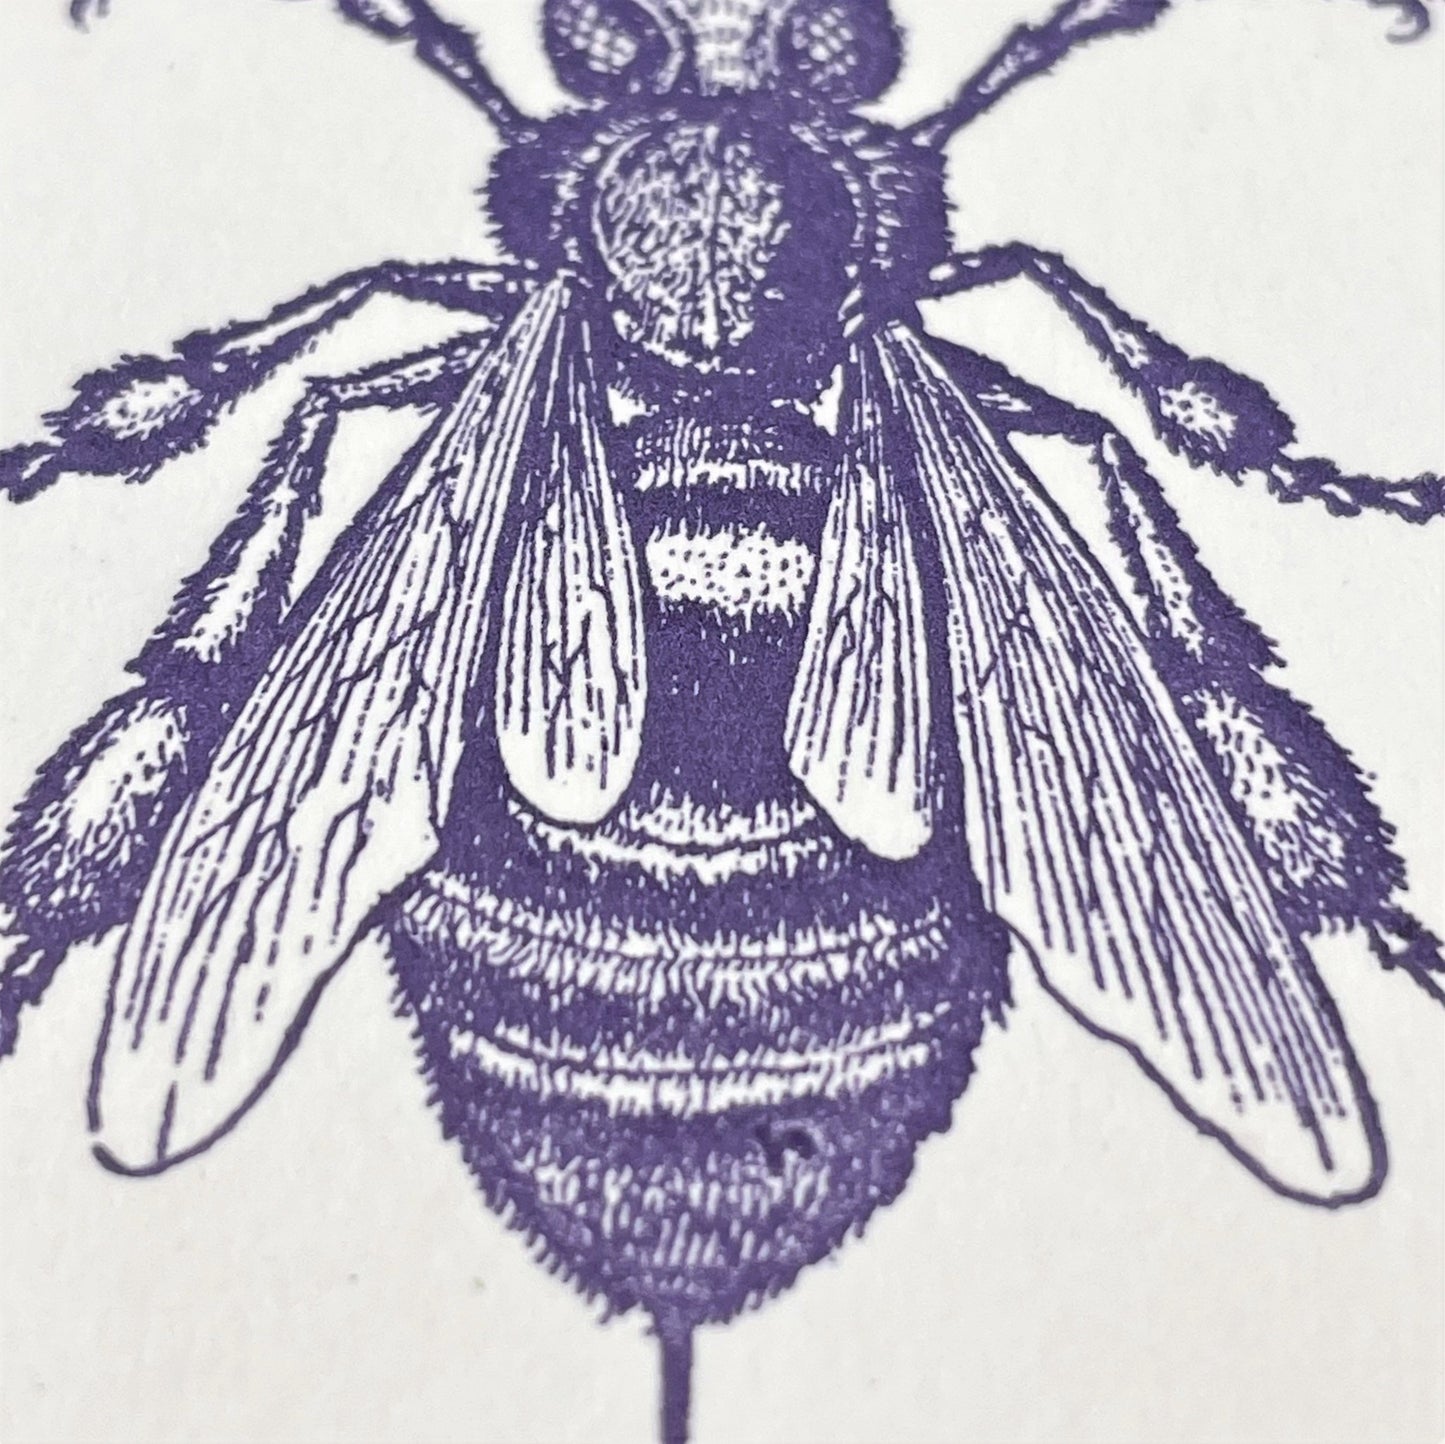 letterpress greetings card of a drawing of the anatomy of a bee, dark blue ink on white, close-up